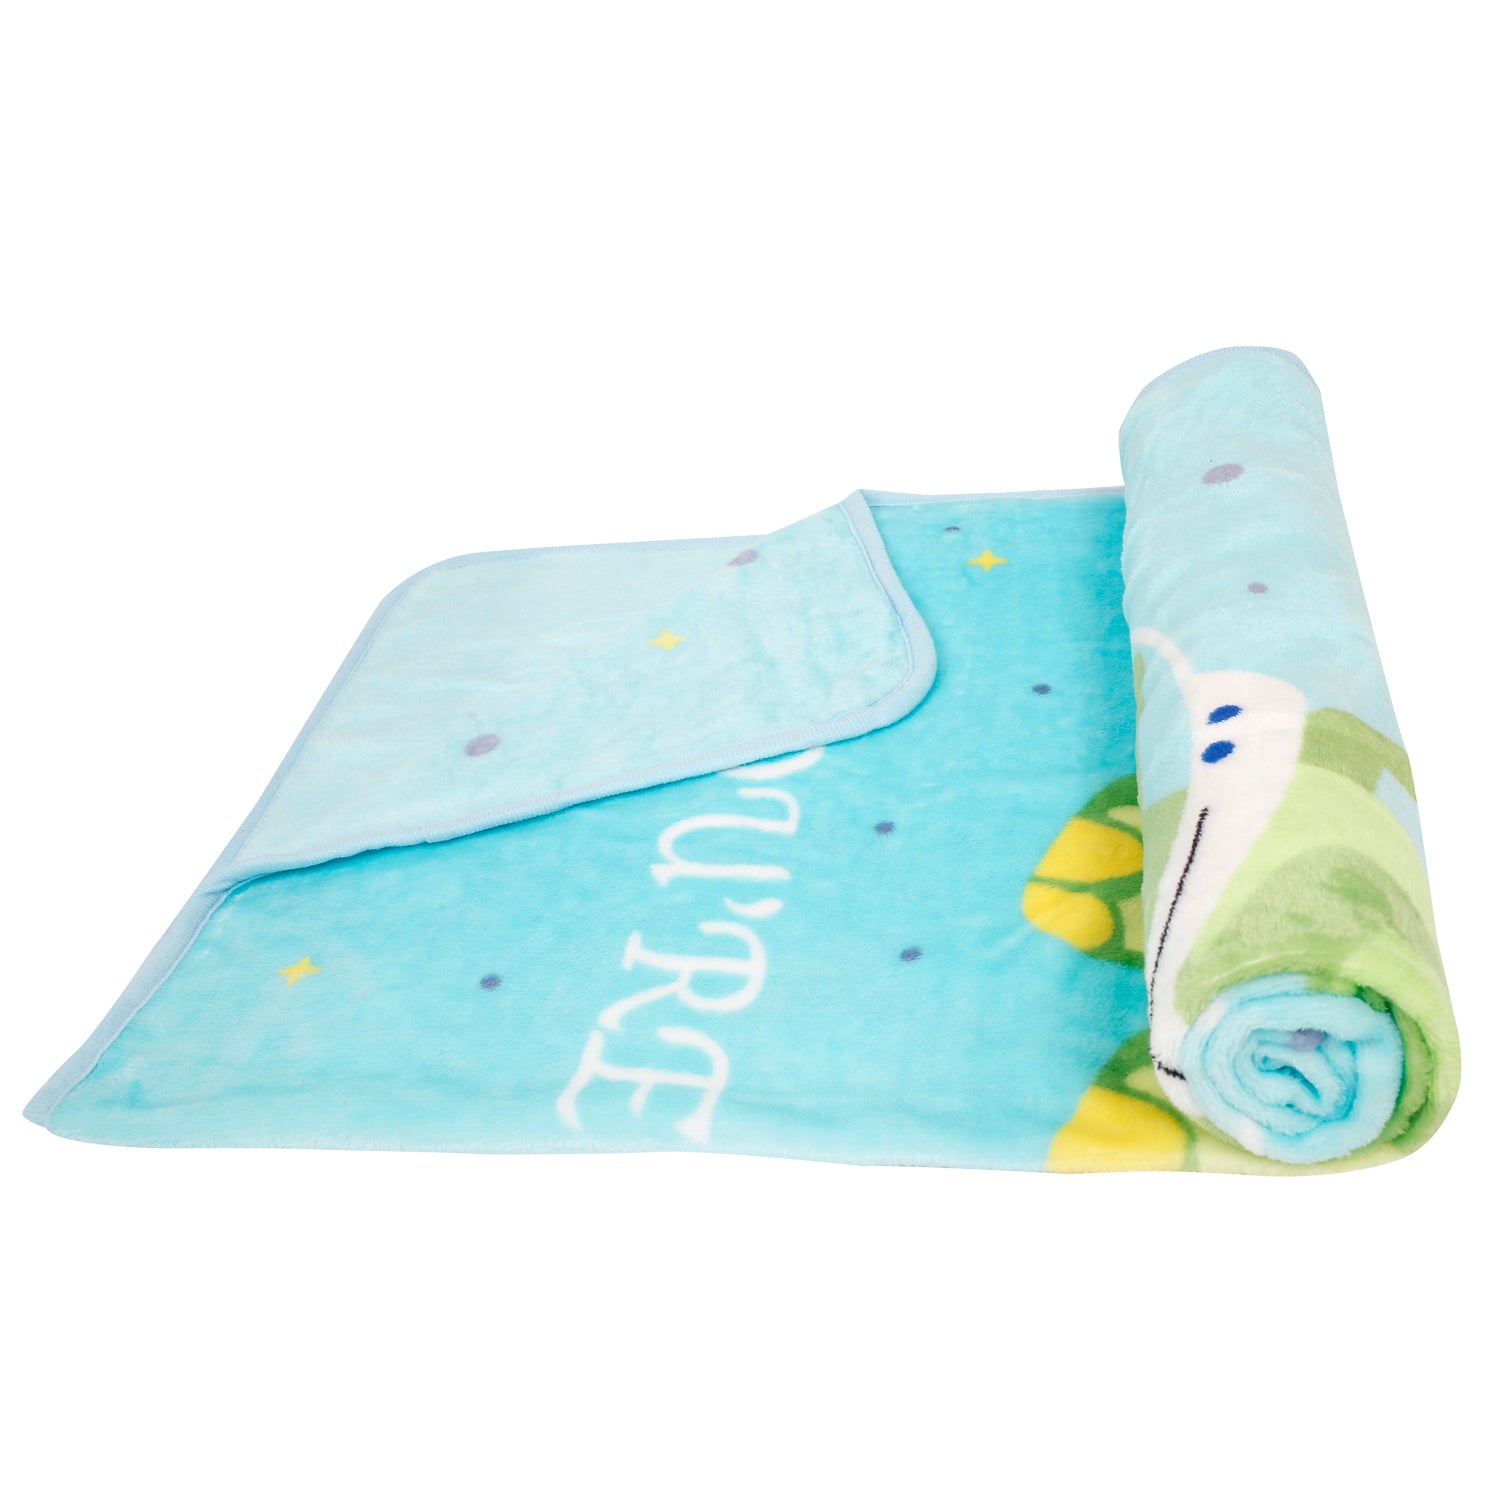 You Are Special Crocodile Blue One Ply Blanket - Baby Moo